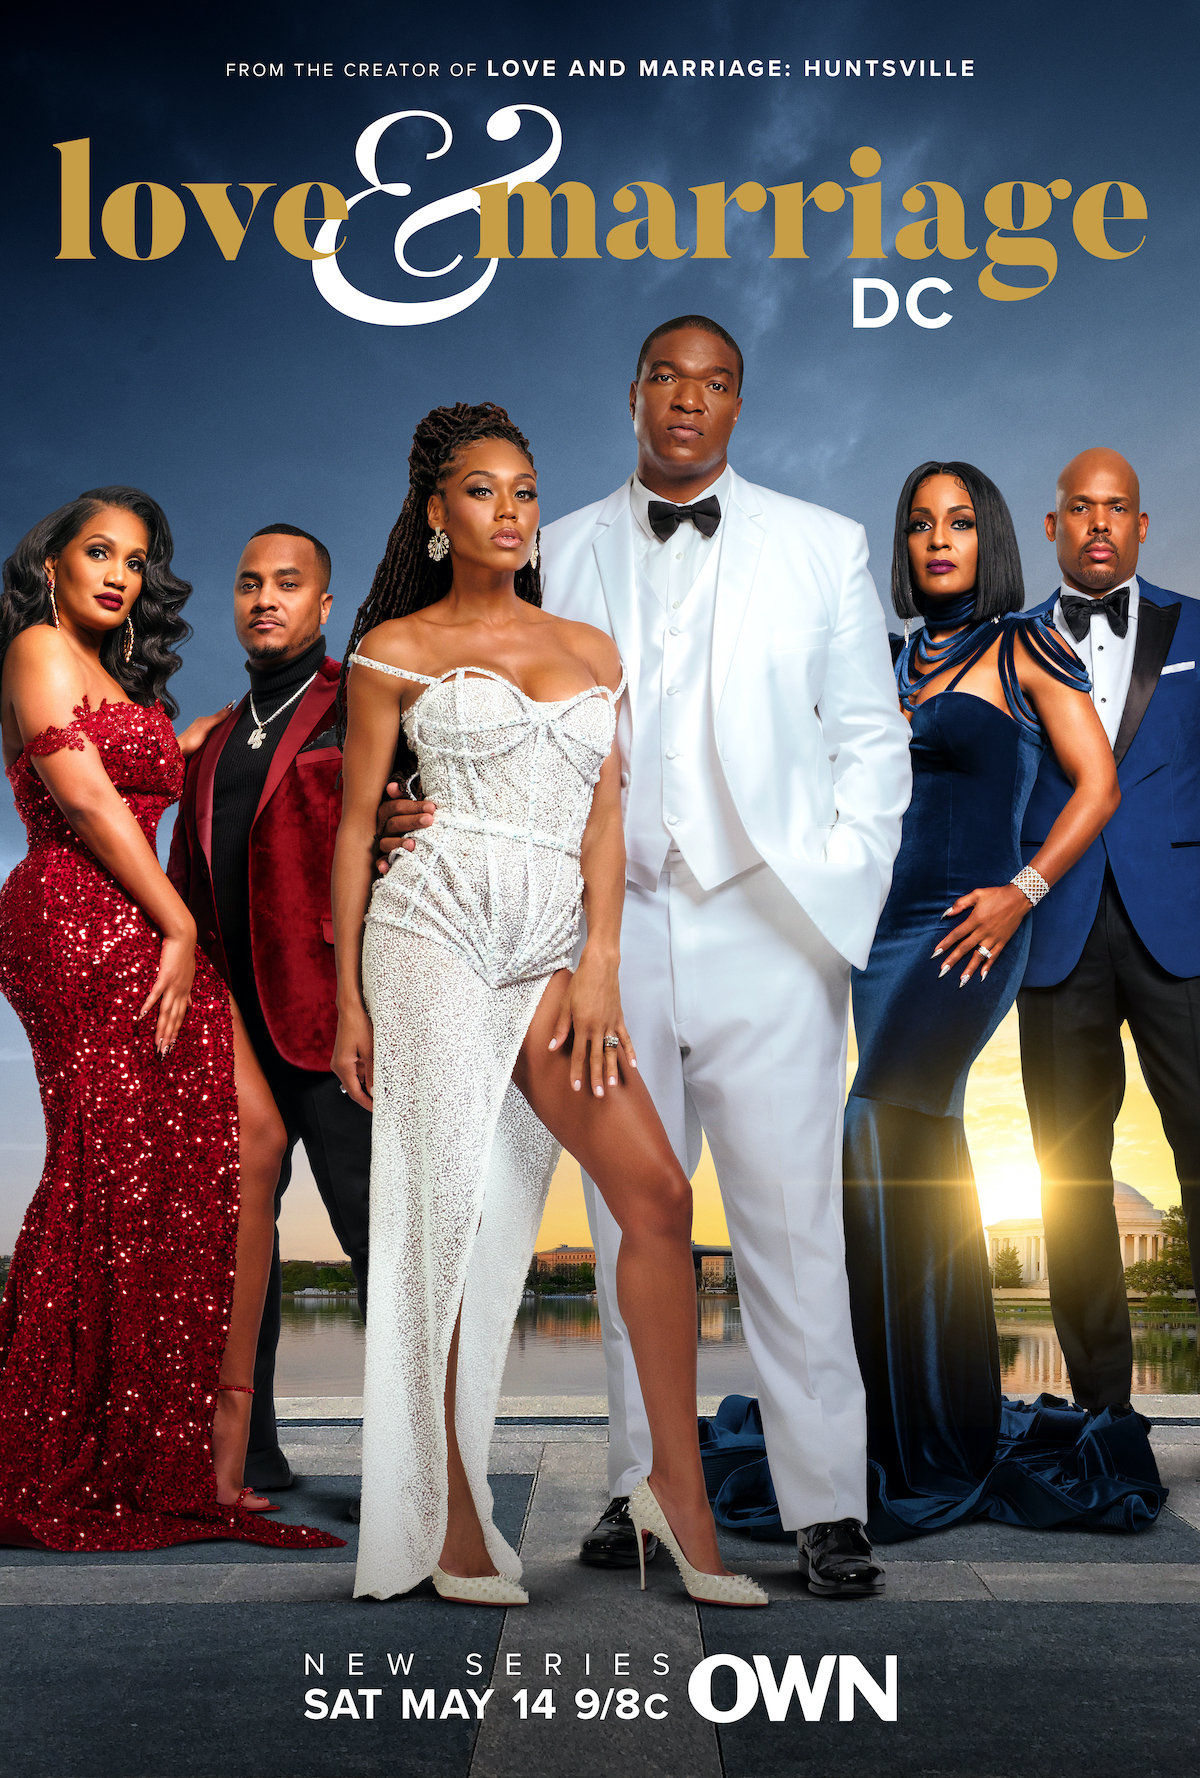 Love And Marriage D C Exclusive Monique Samuels Reveals Reluctance To Return To Reality Tv